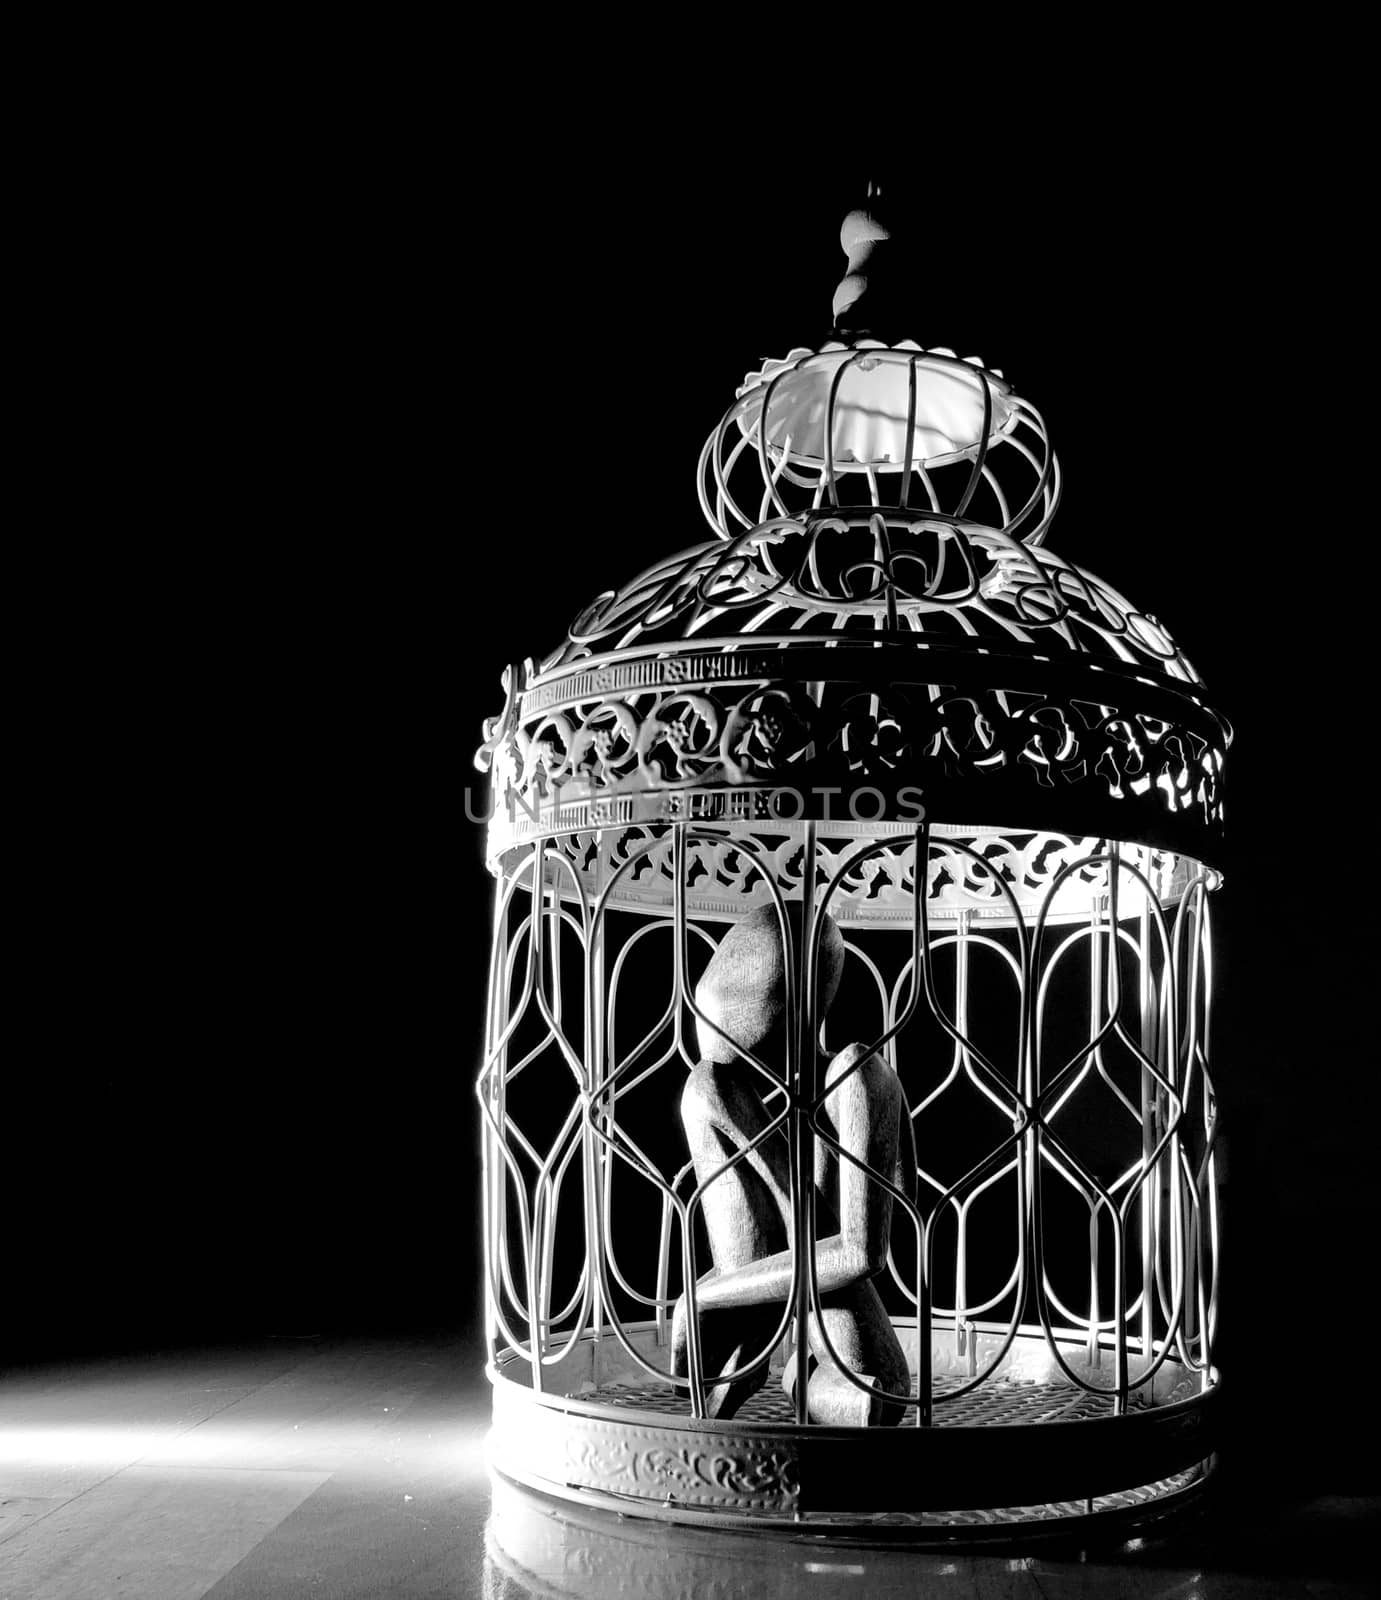 Wooden figurine in a cage by anderm